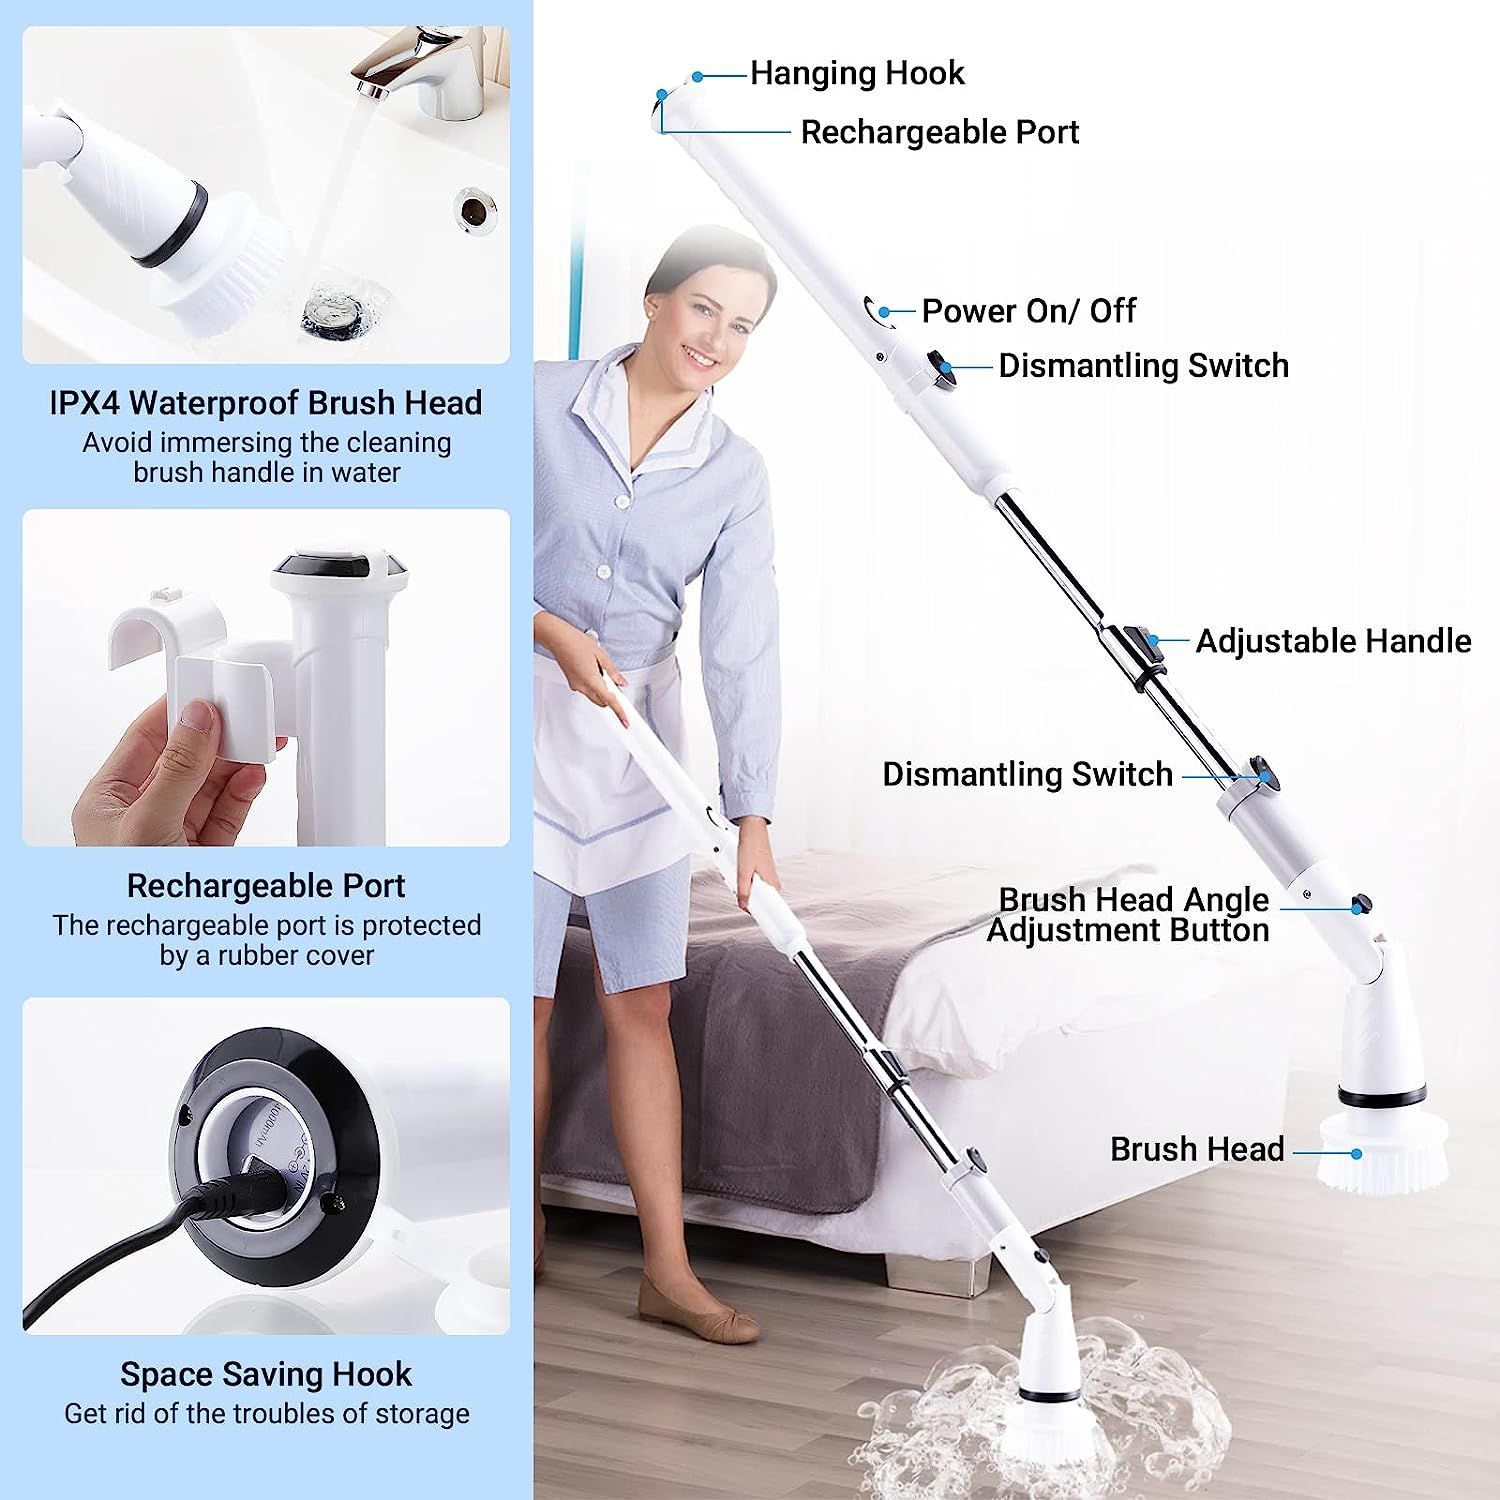 https://media.karousell.com/media/photos/products/2023/7/5/cleaning_brush_electric_spin_s_1688547692_040d0132_progressive